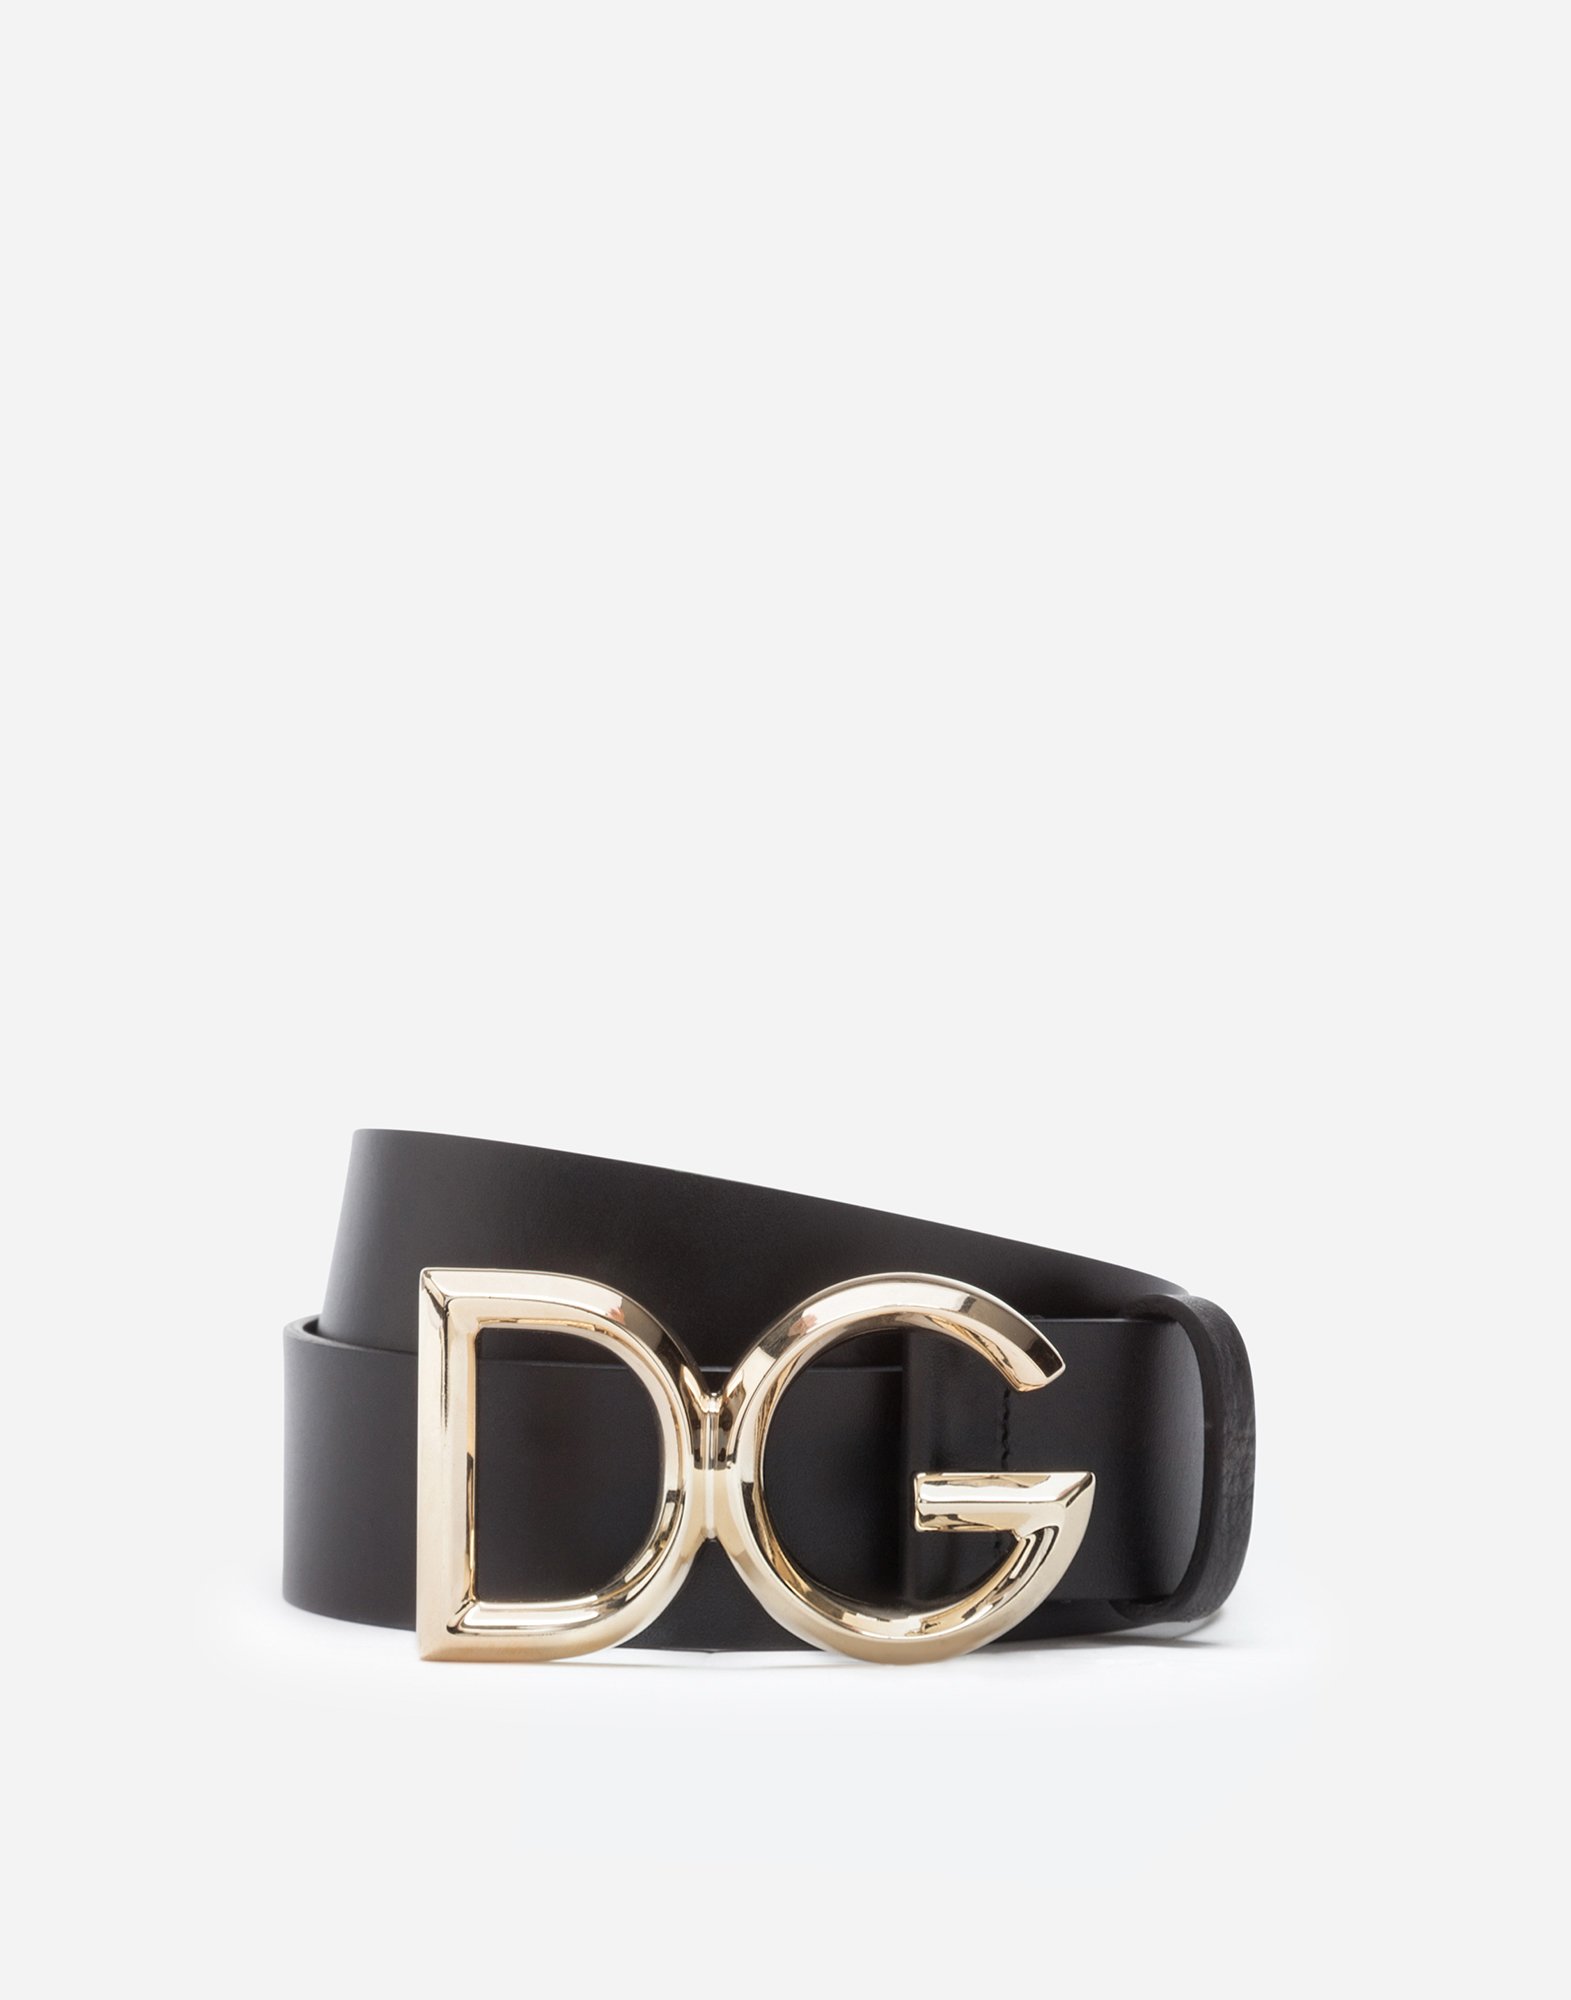 Lux leather belt with DG logo in Black/Gold